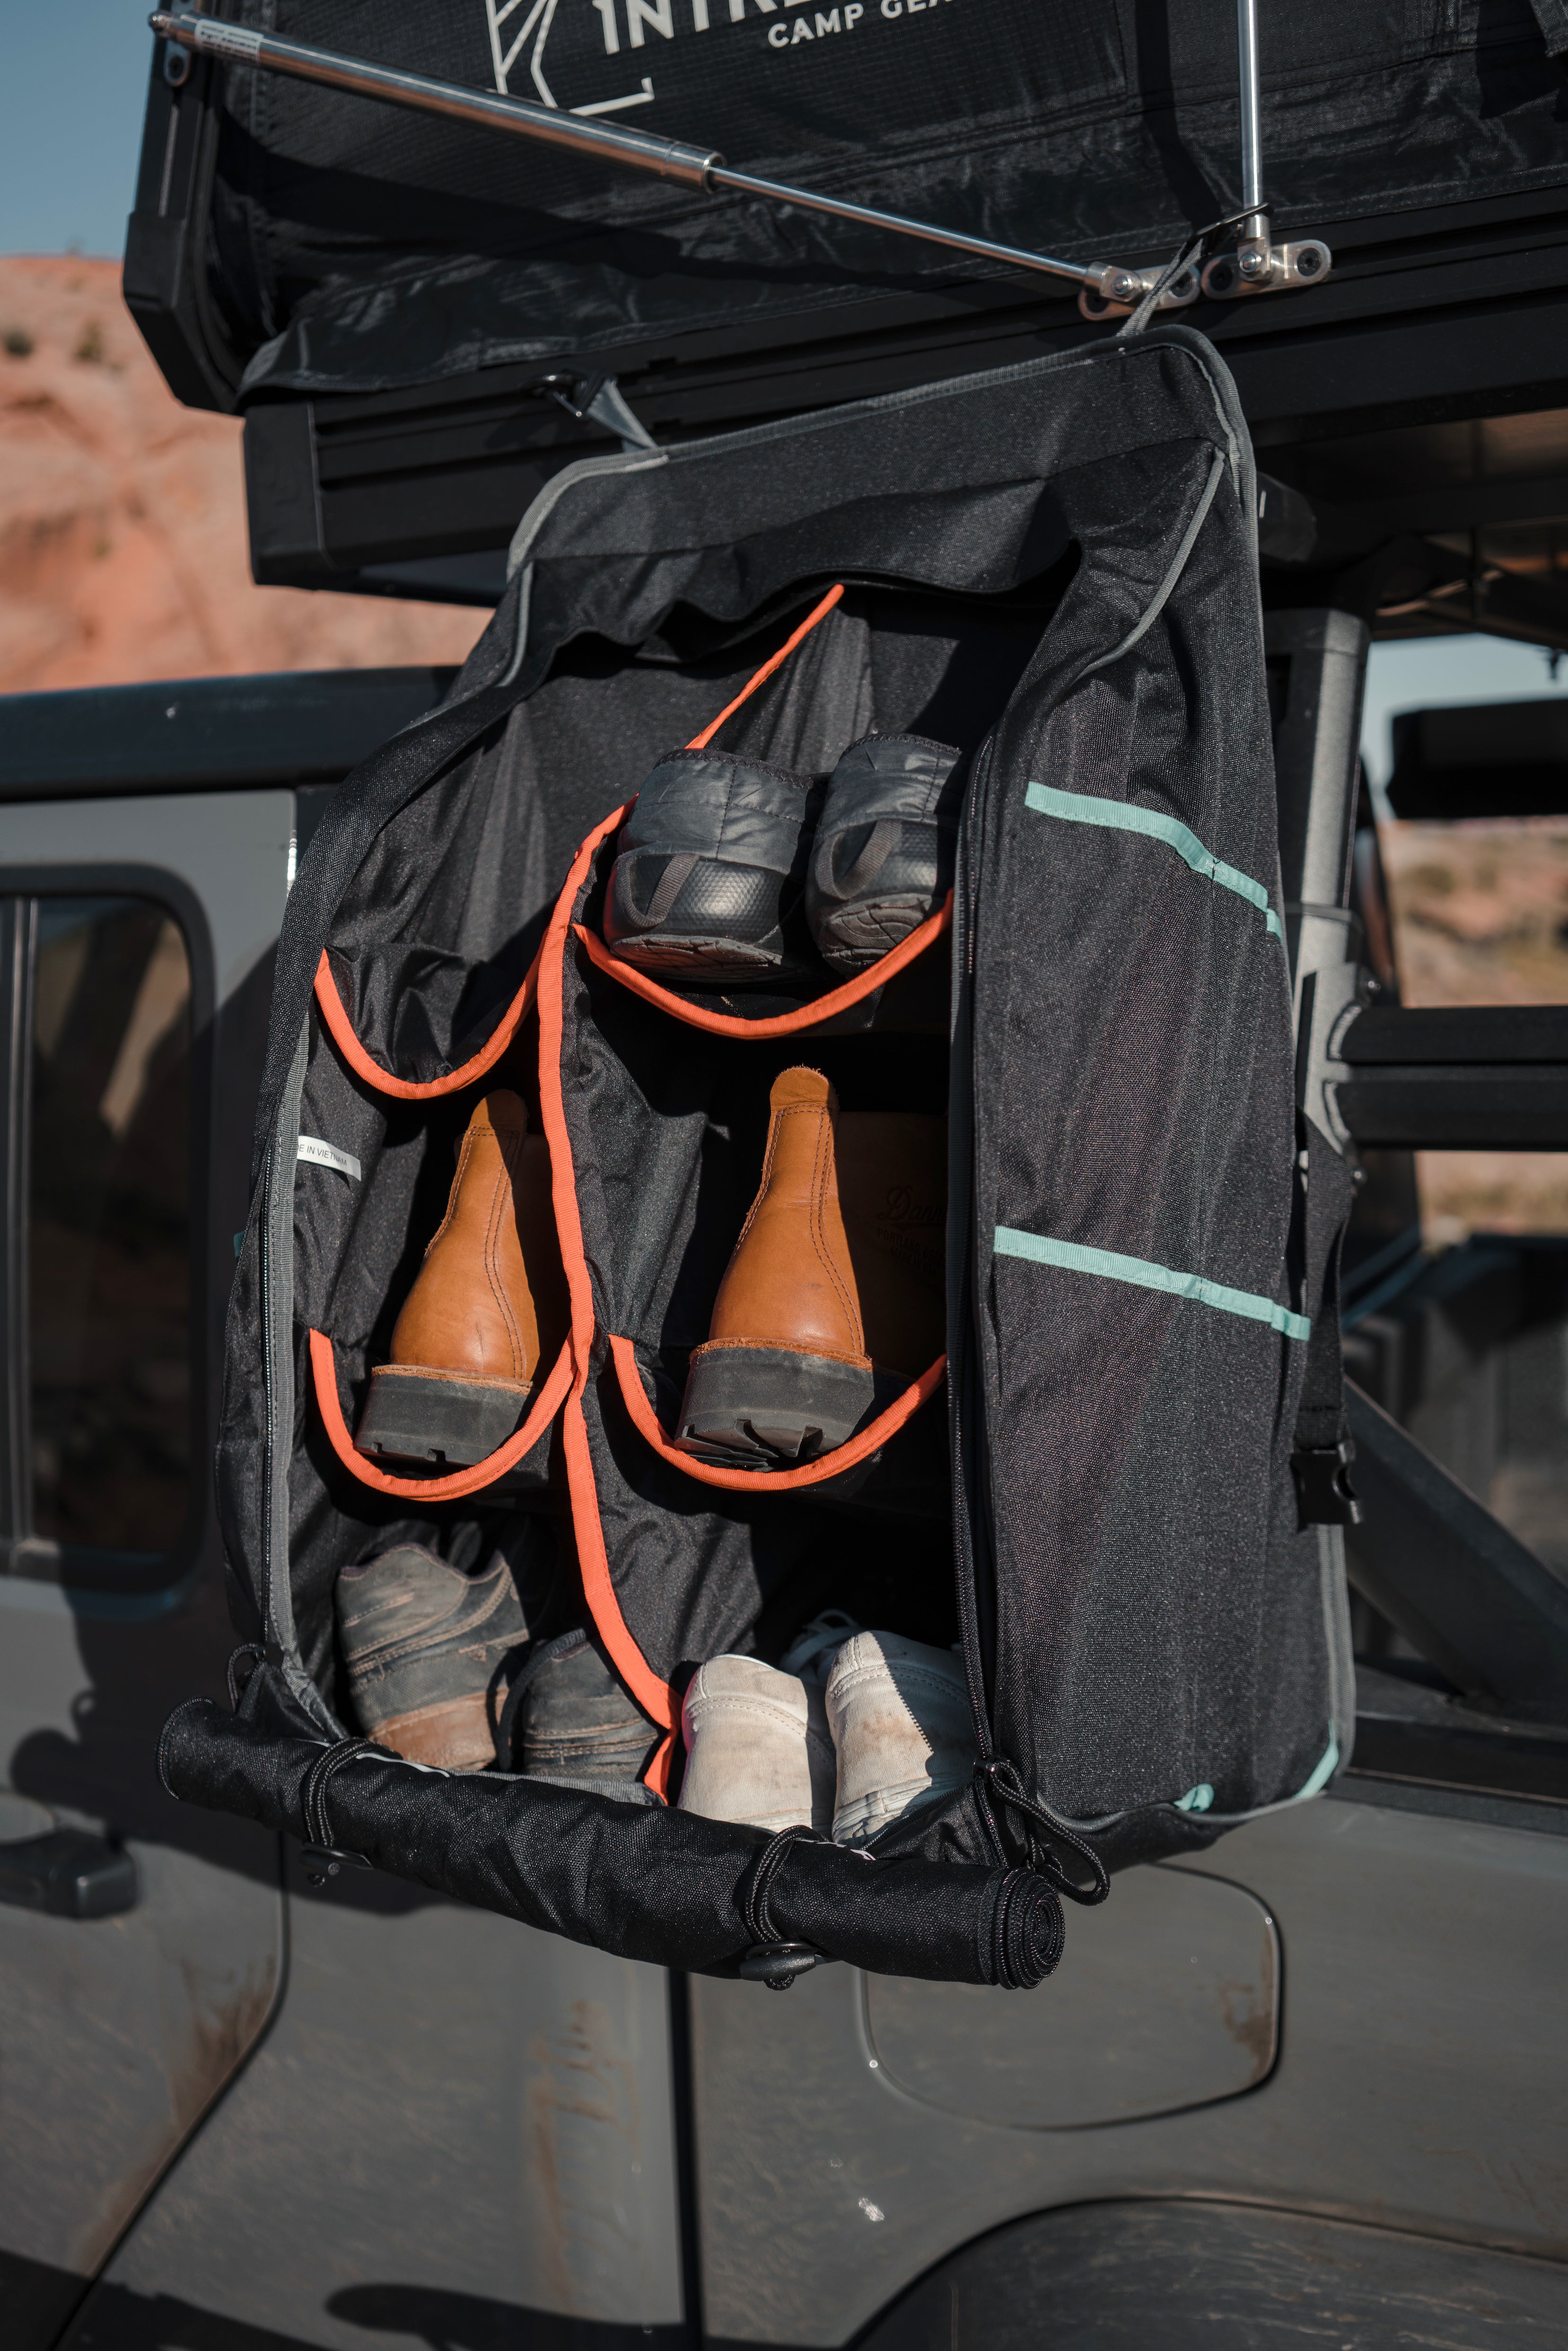 Rooftop Tent Accessories – Intrepid Camp Gear